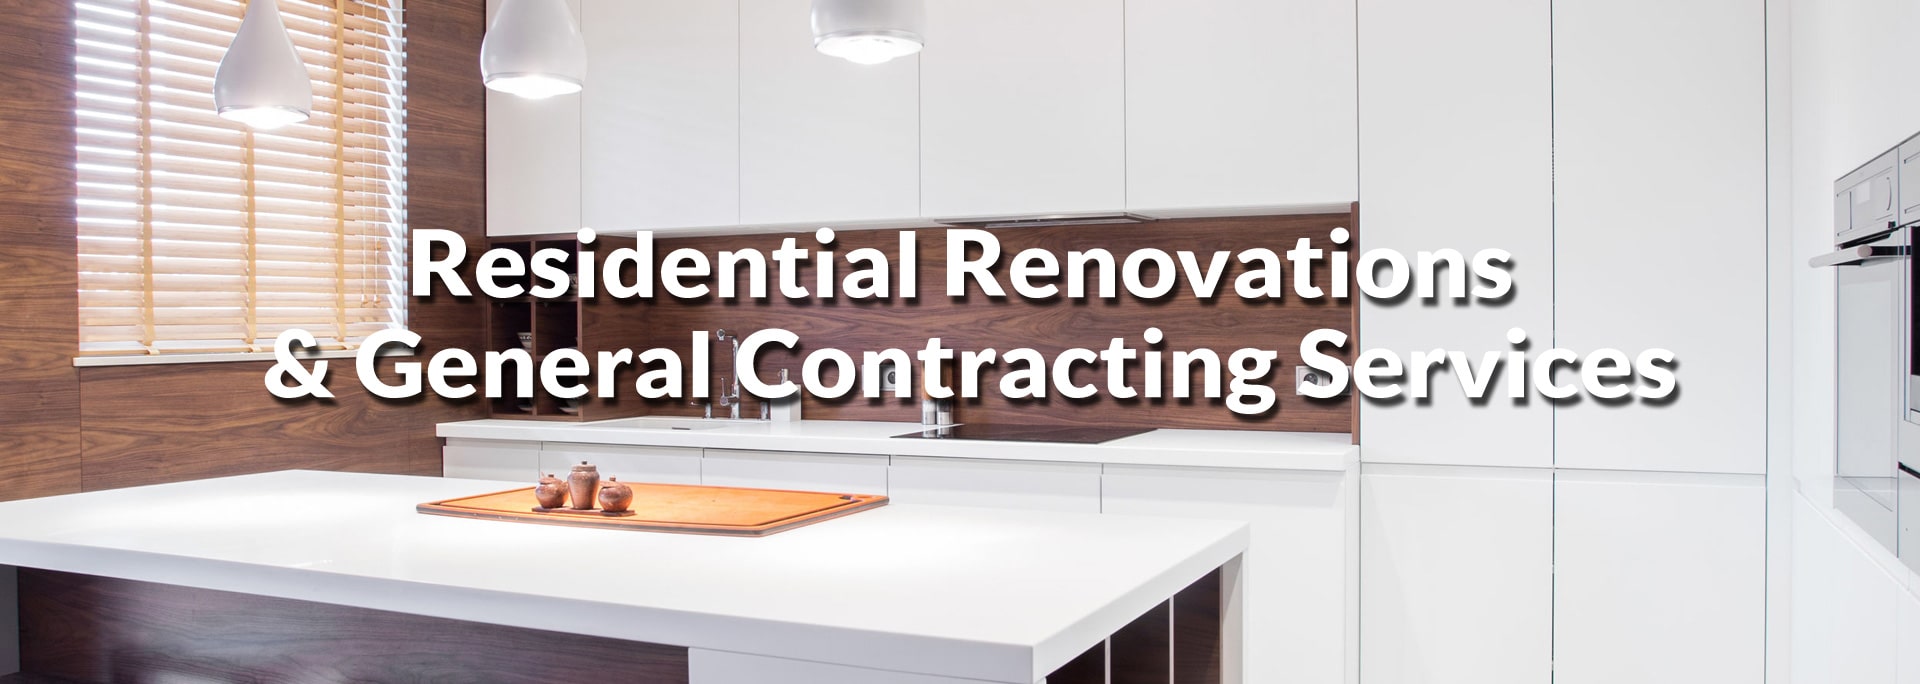 residential renovations & general contracting services surrey